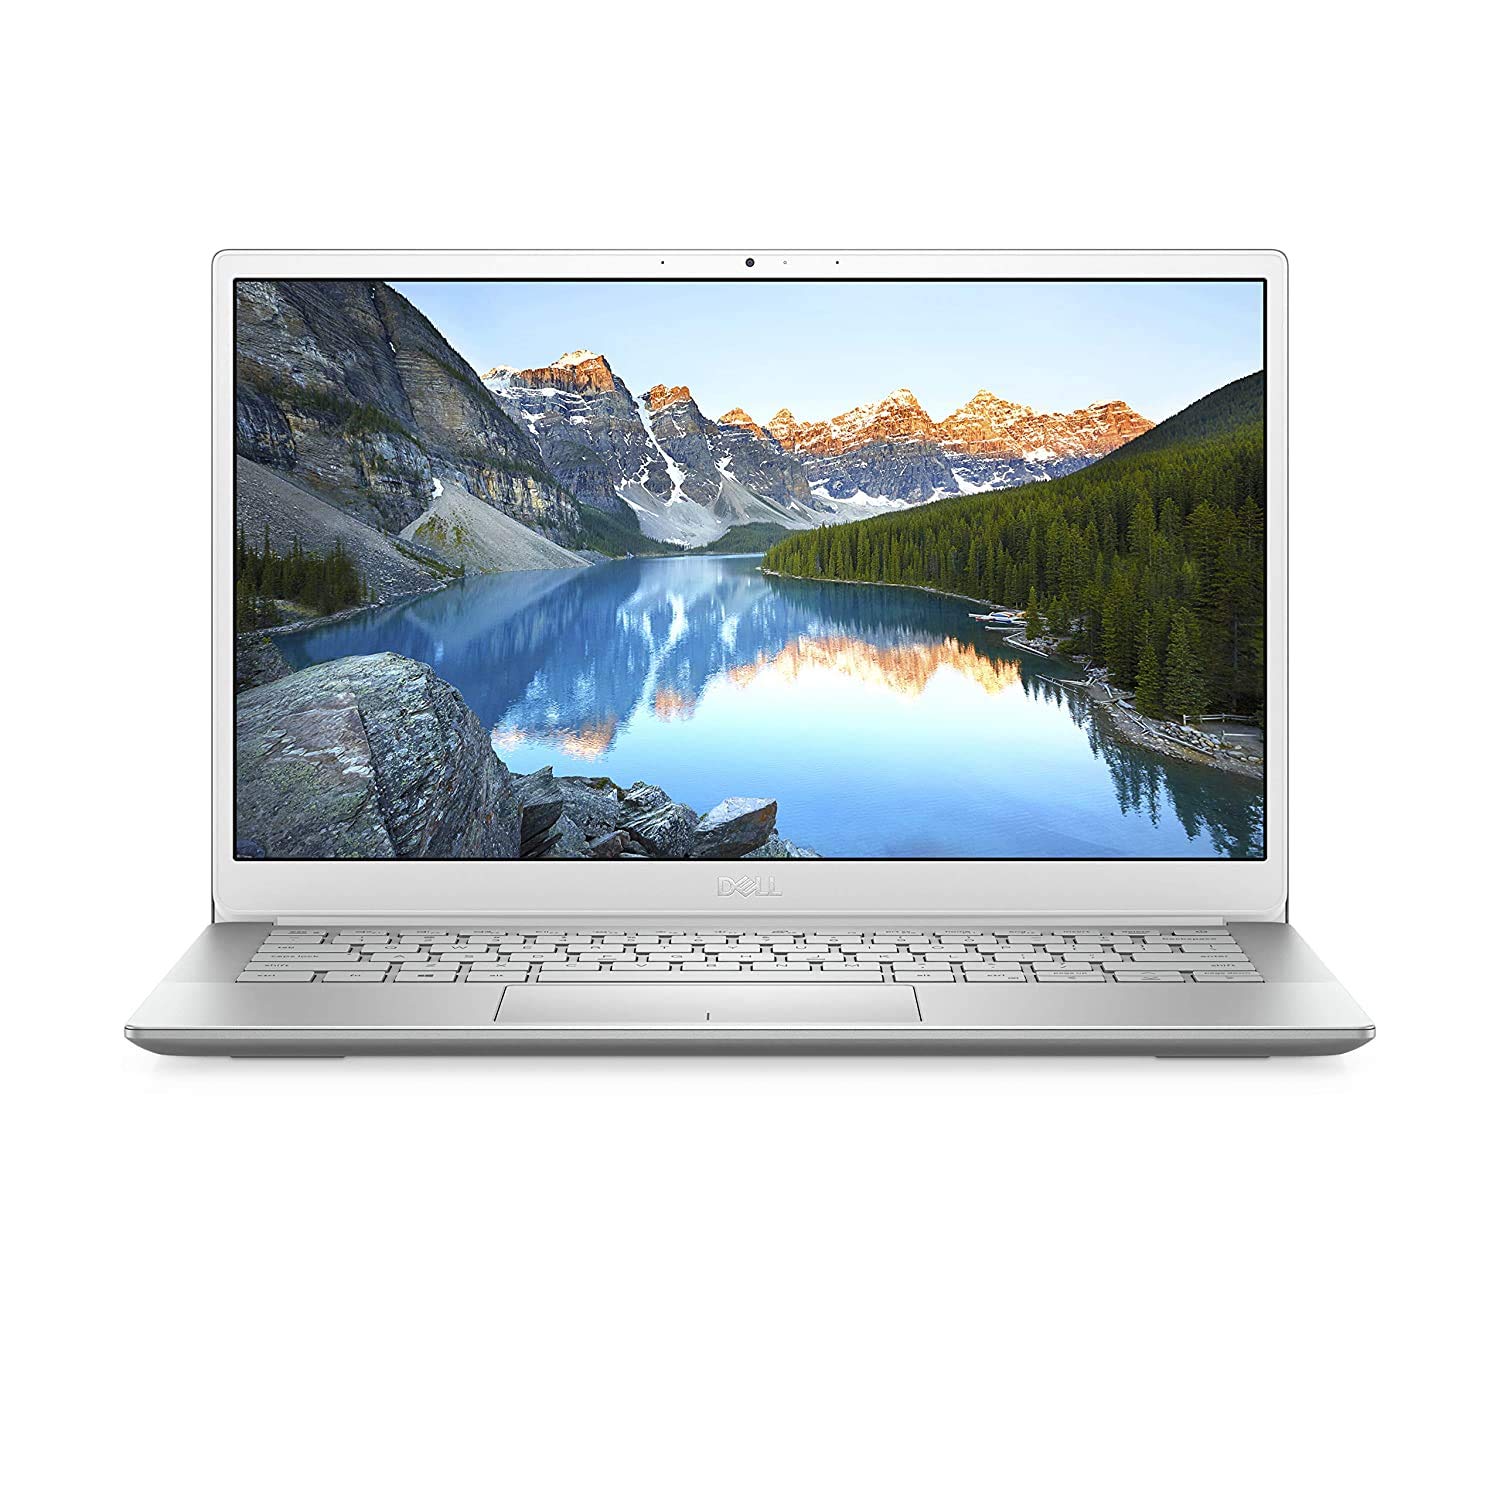 Dell Inspiron 13 5390 Notebook